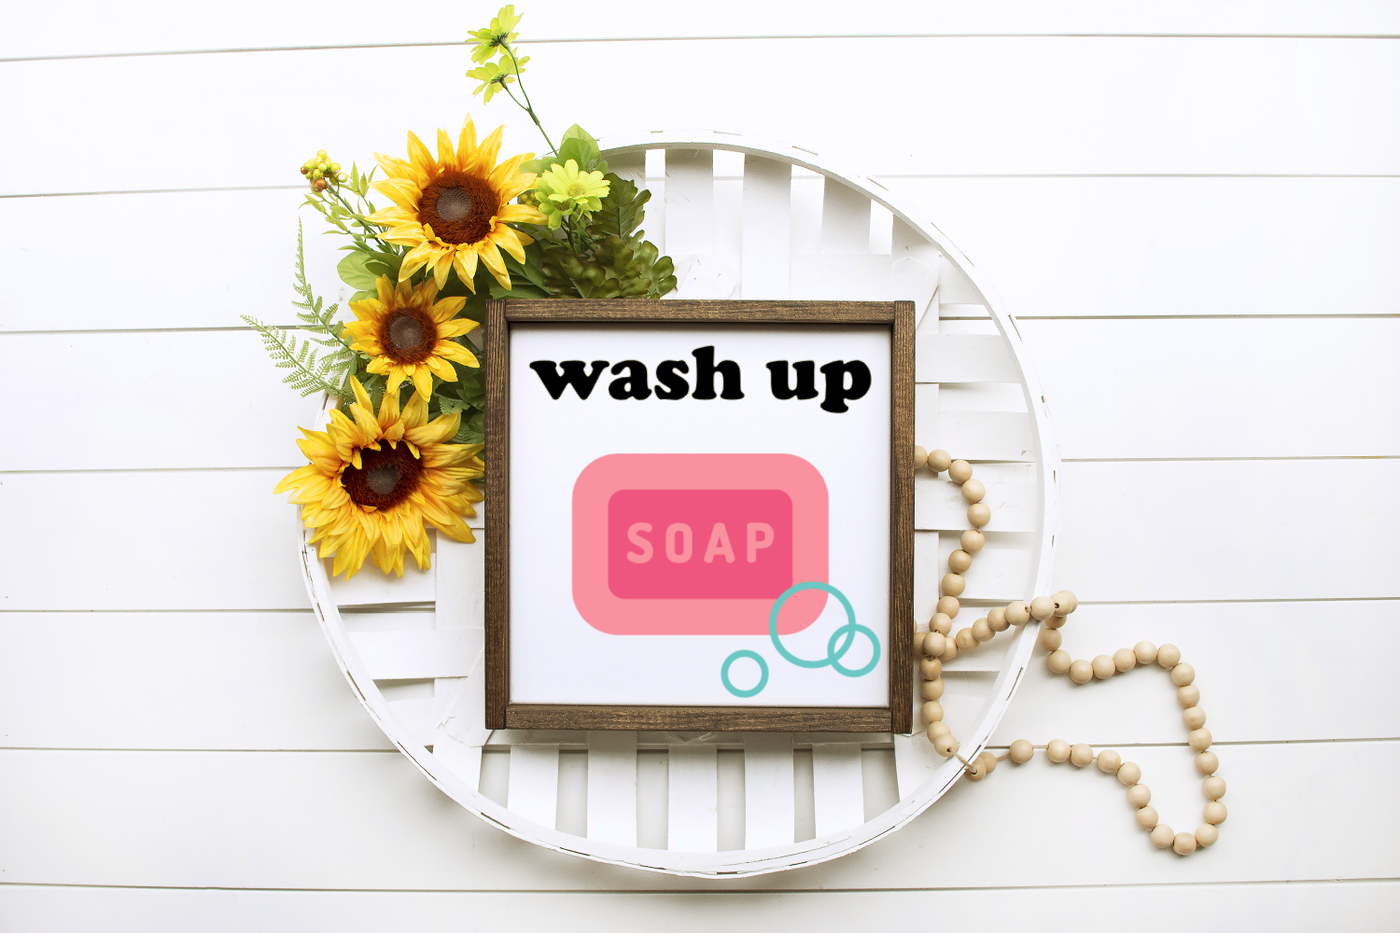 A decorative wicker plate with sunflowers sits on a white paneled backdrop. On to is a square wooden frame with a design that says "wash up" with a bar of pink soap and bubbles.